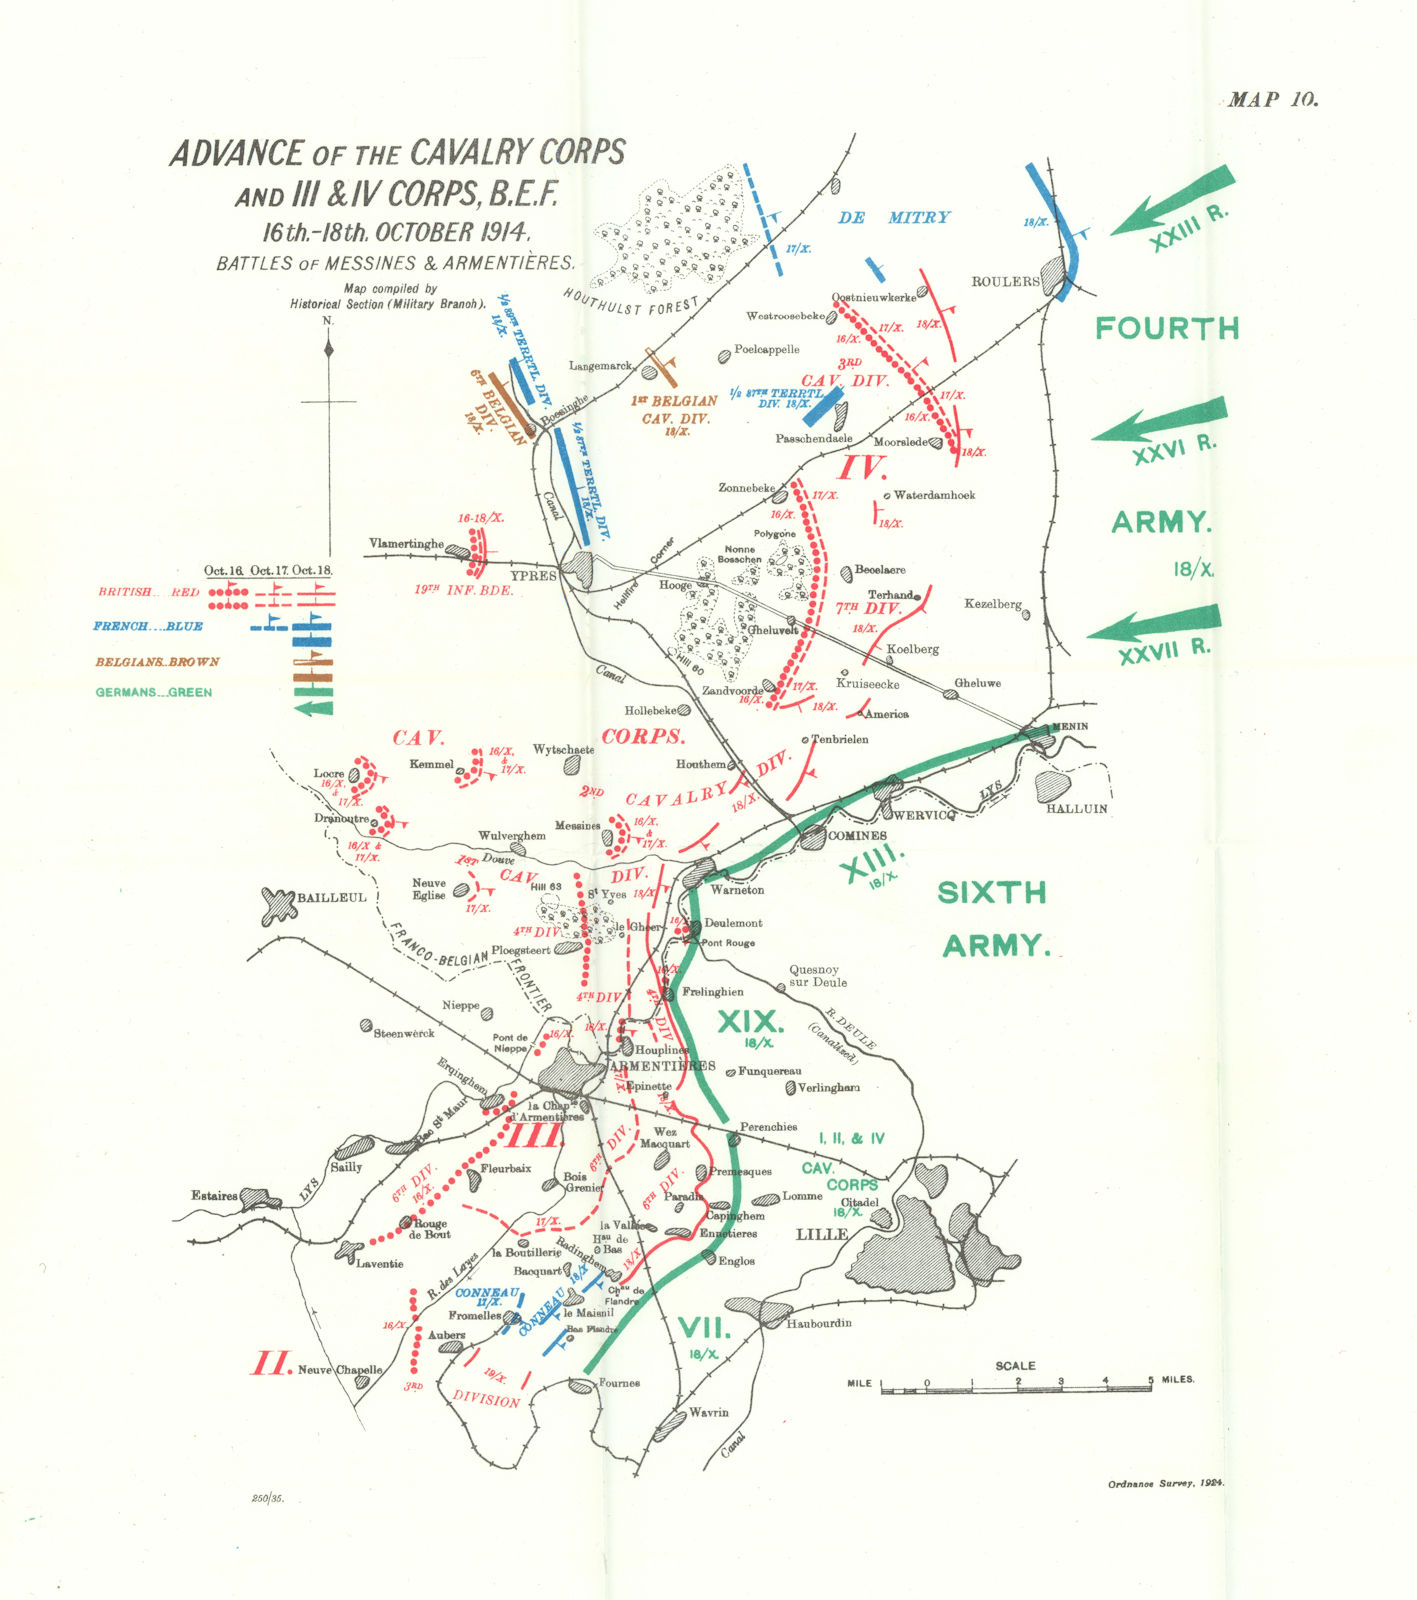 Battles of Messines & Armentières. Advance 16-18th October 1914. WW1. 1933 map